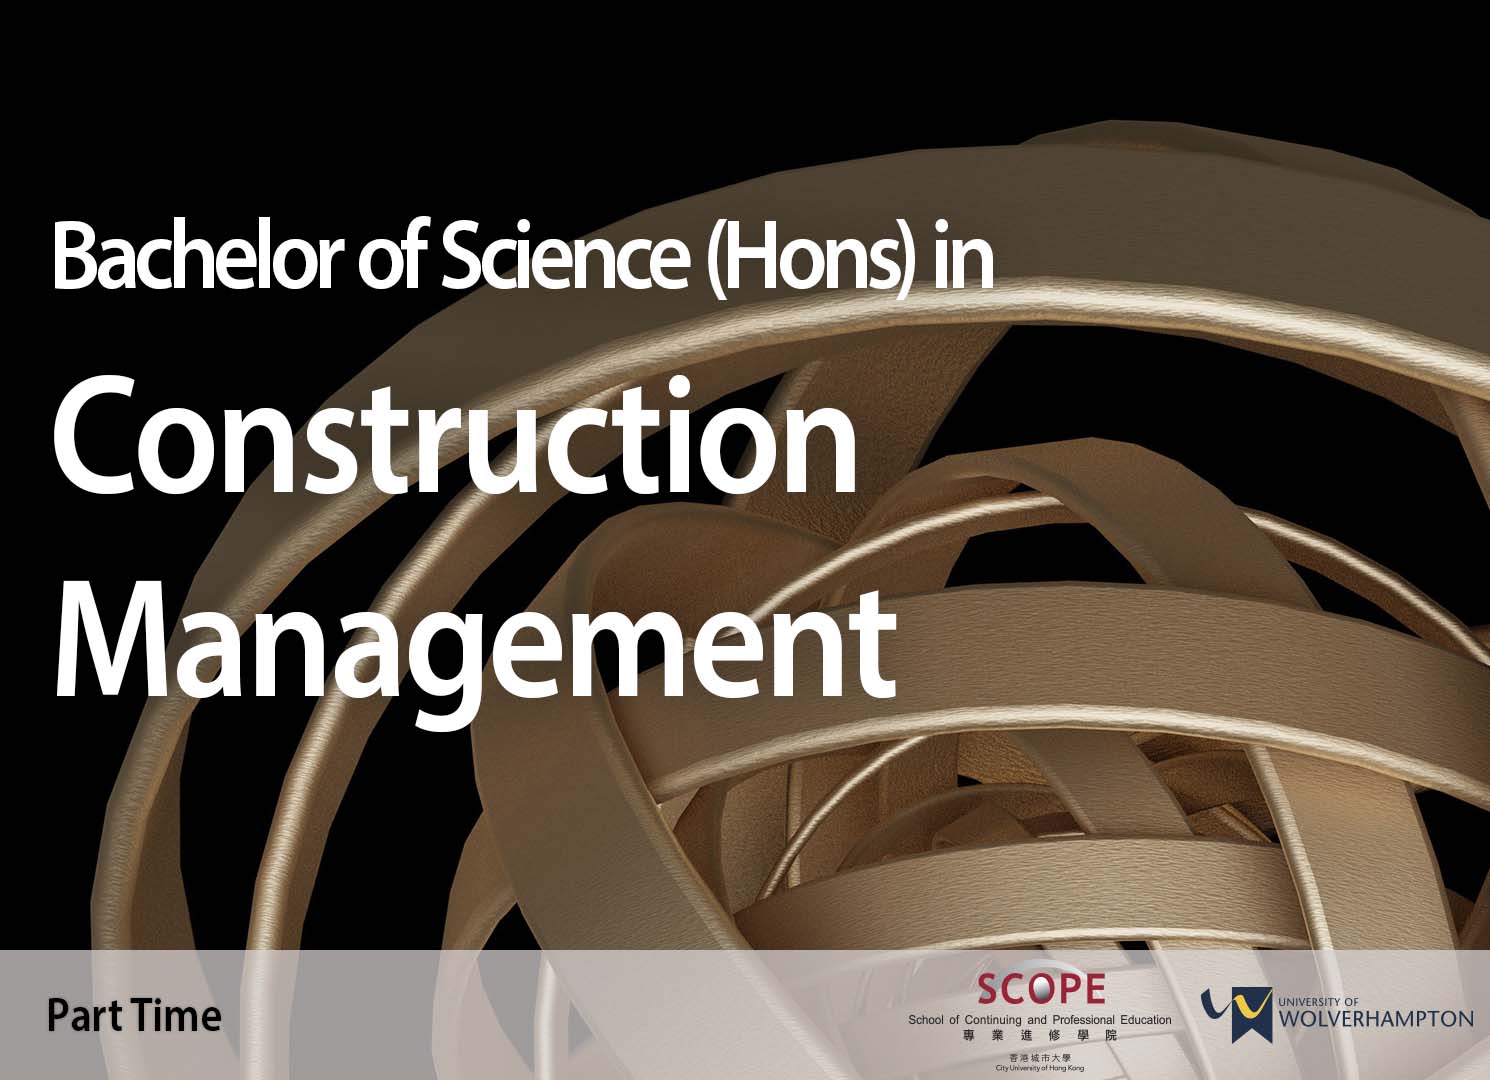 Bachelor of Science (Honours) in Construction Management